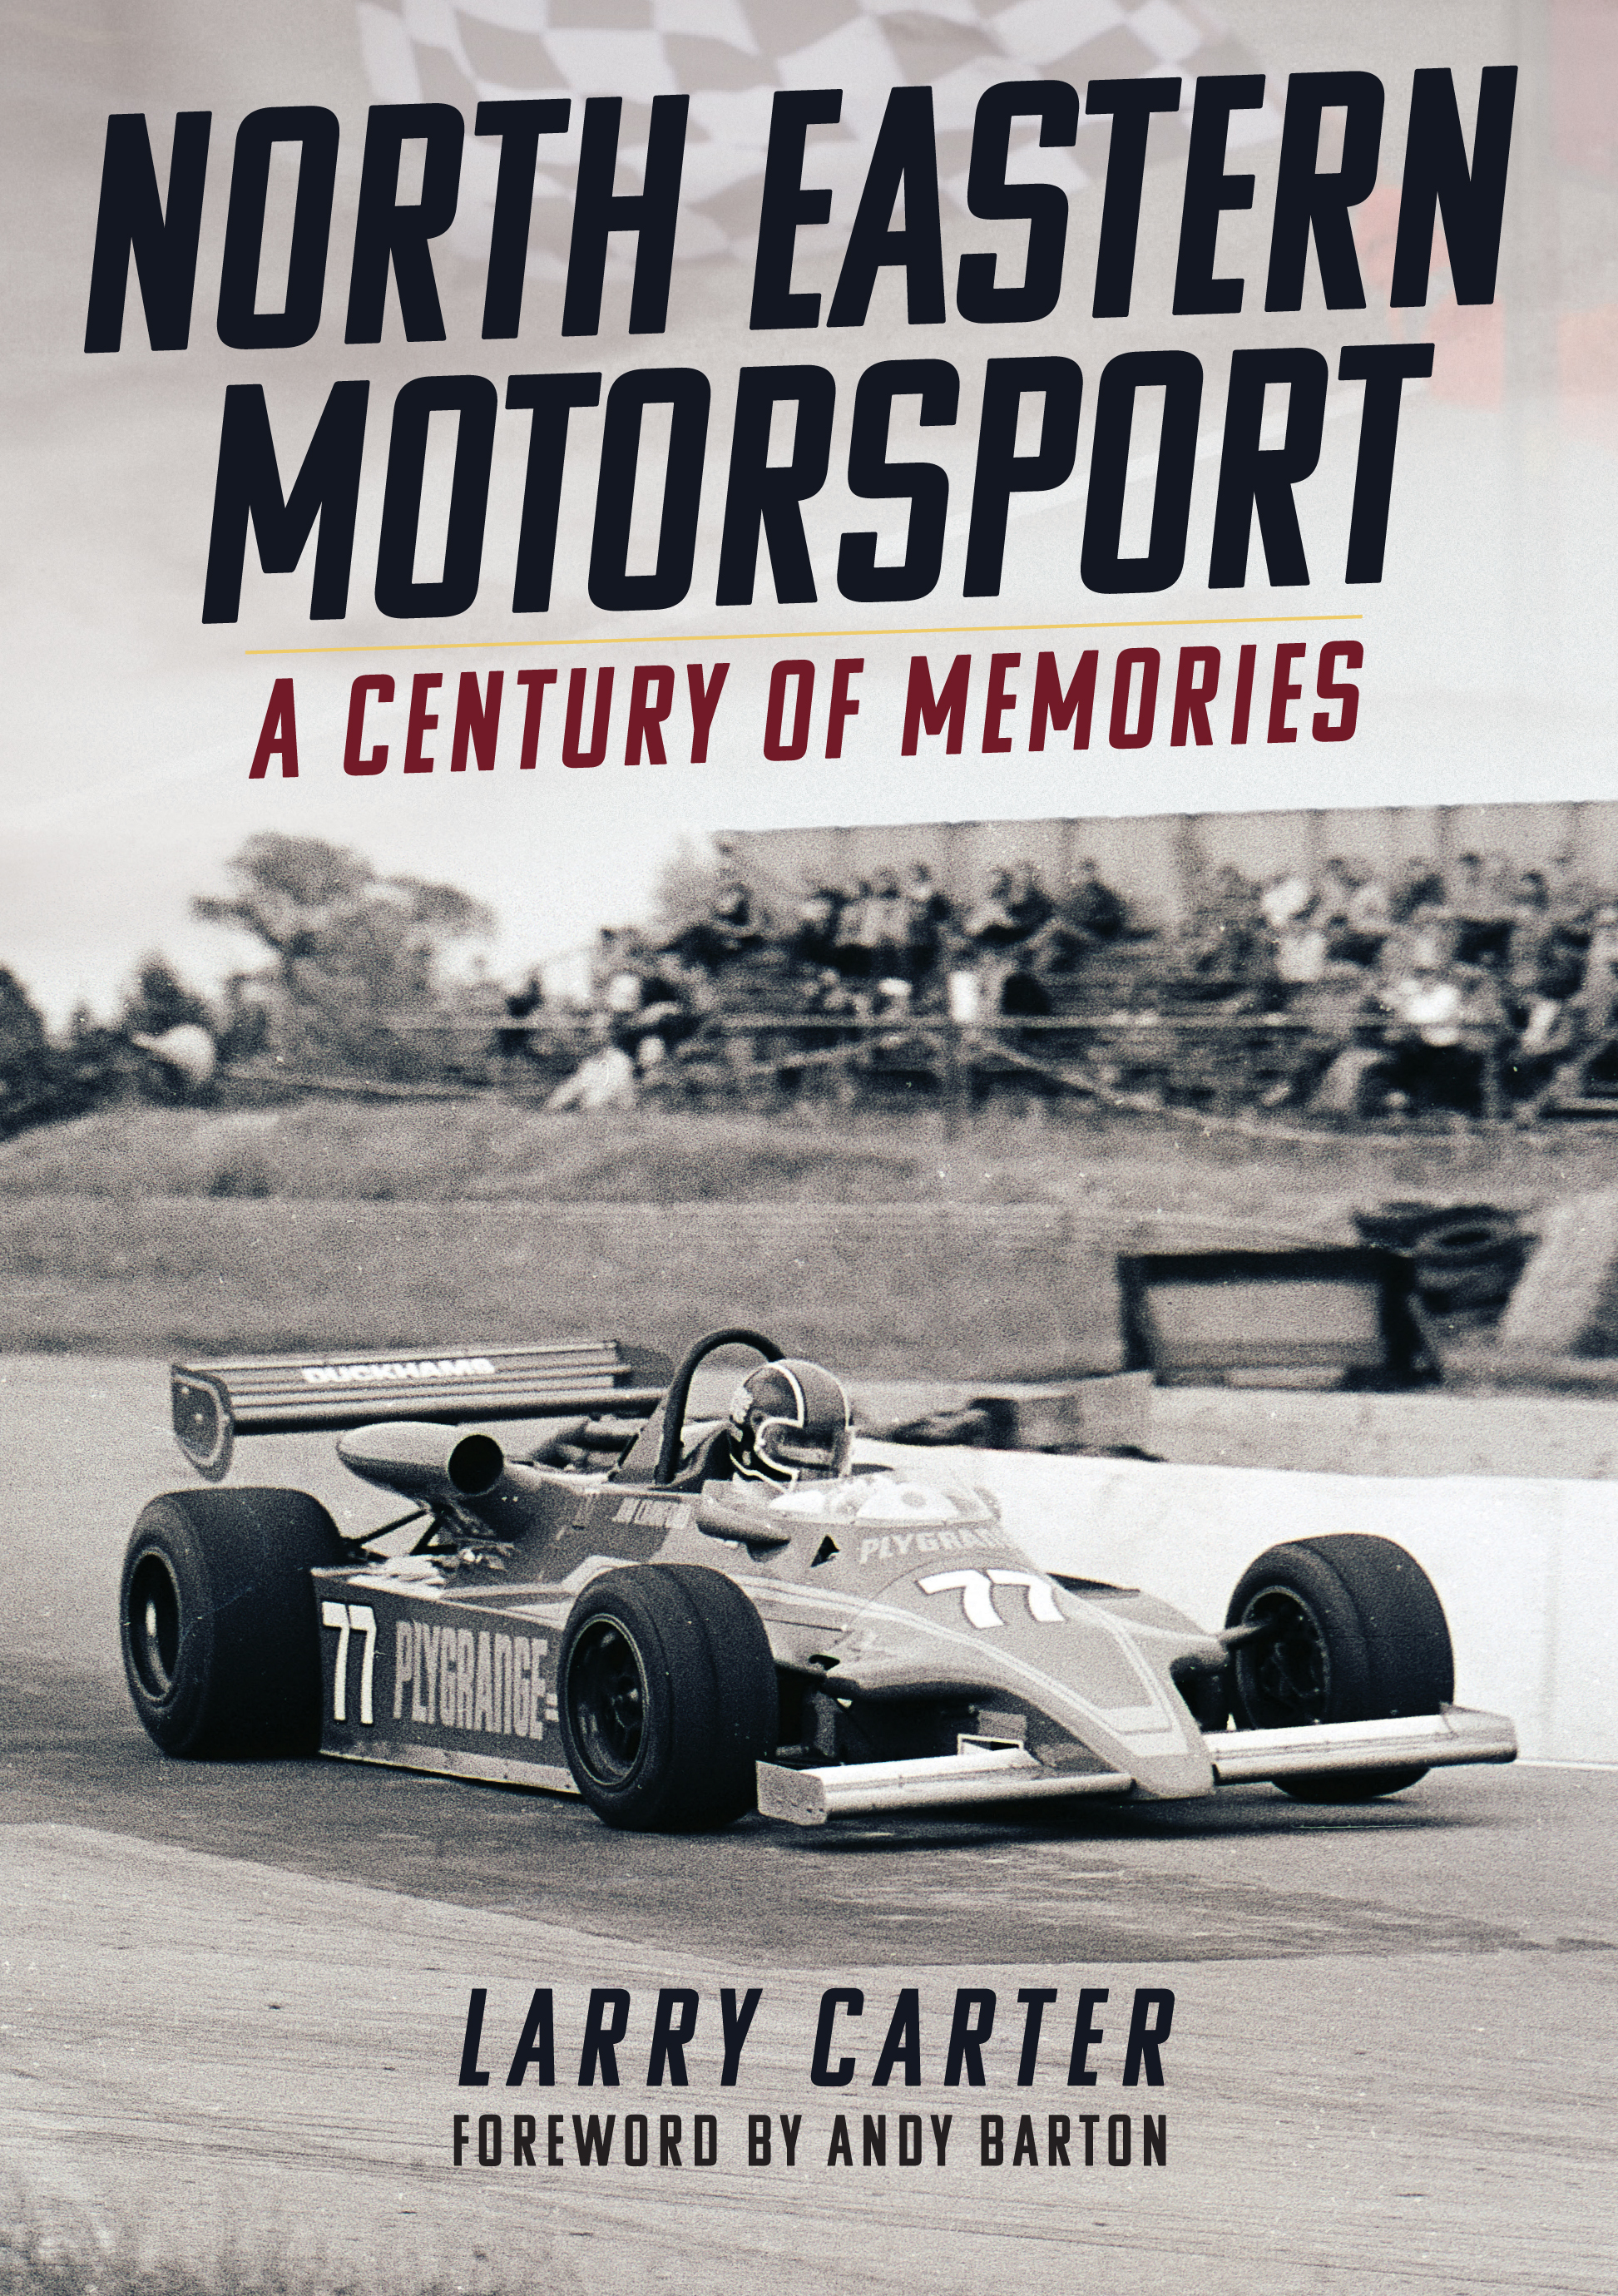 North Eastern Motorsport: A Century of Memories is published by Amberley for £14.99